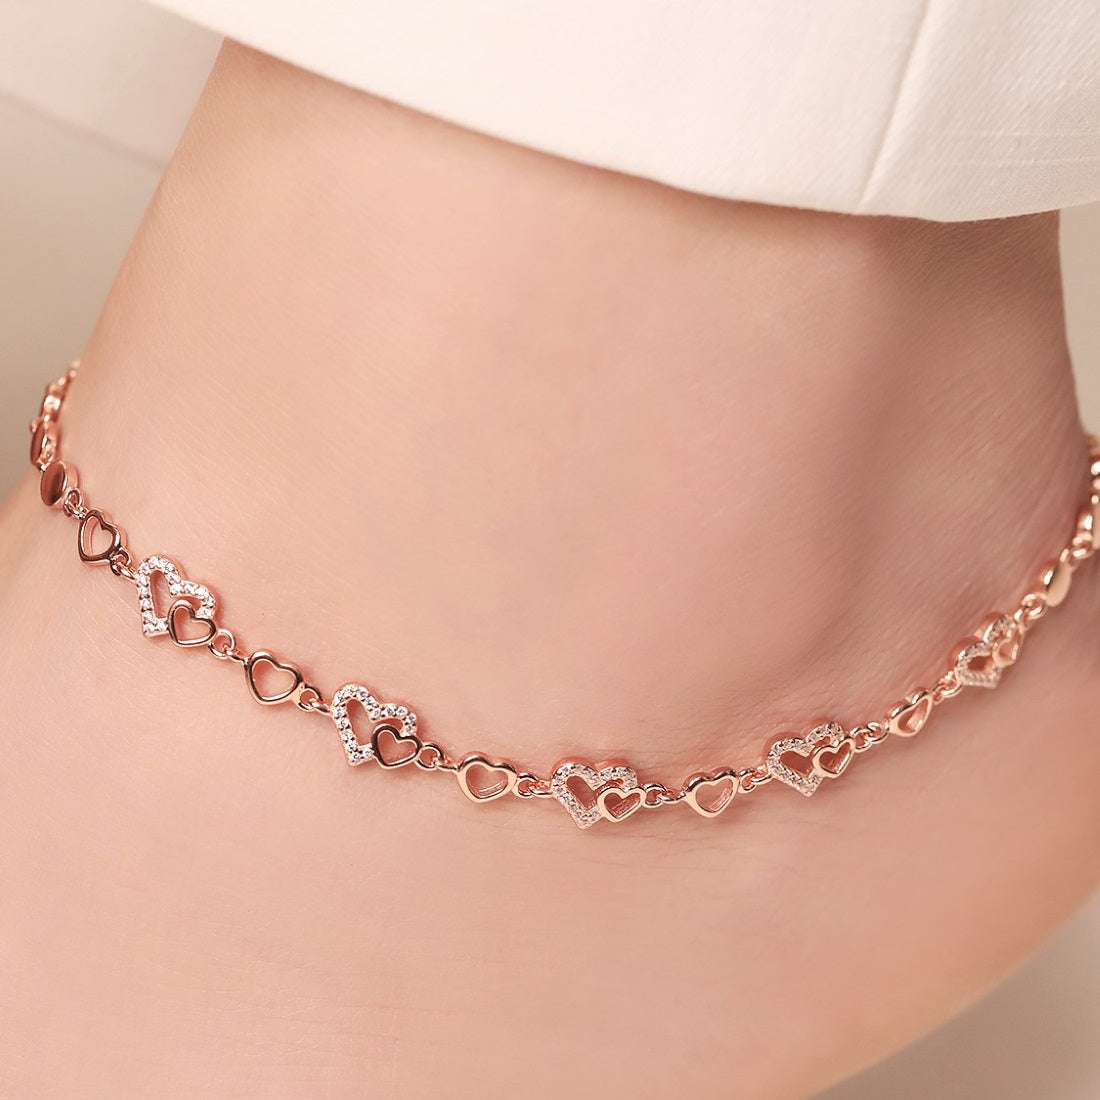 Romantic Rose 925 Sterling Silver Rose Gold-Plated Heart Anklet